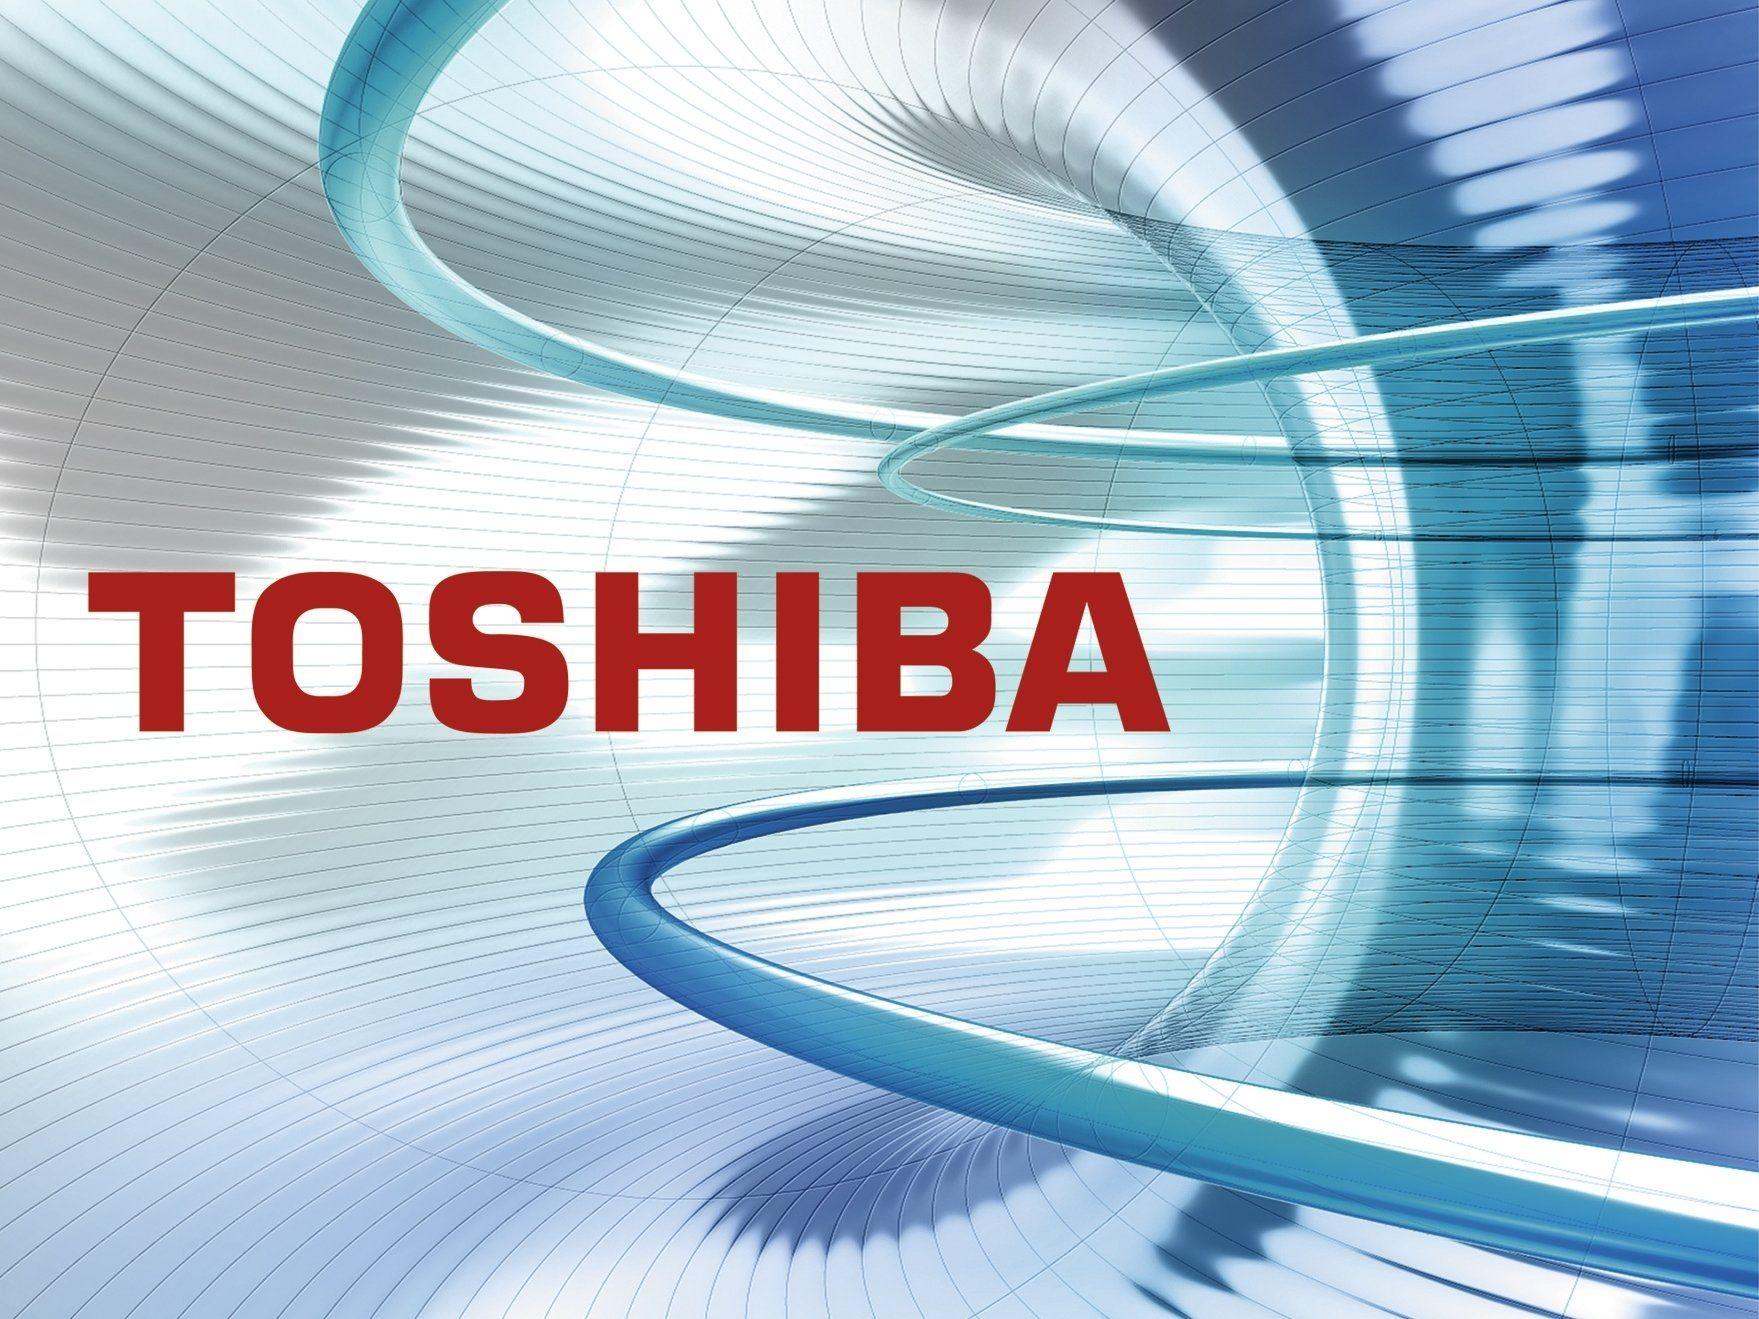 Toshiba HD Wallpaper and Background Image